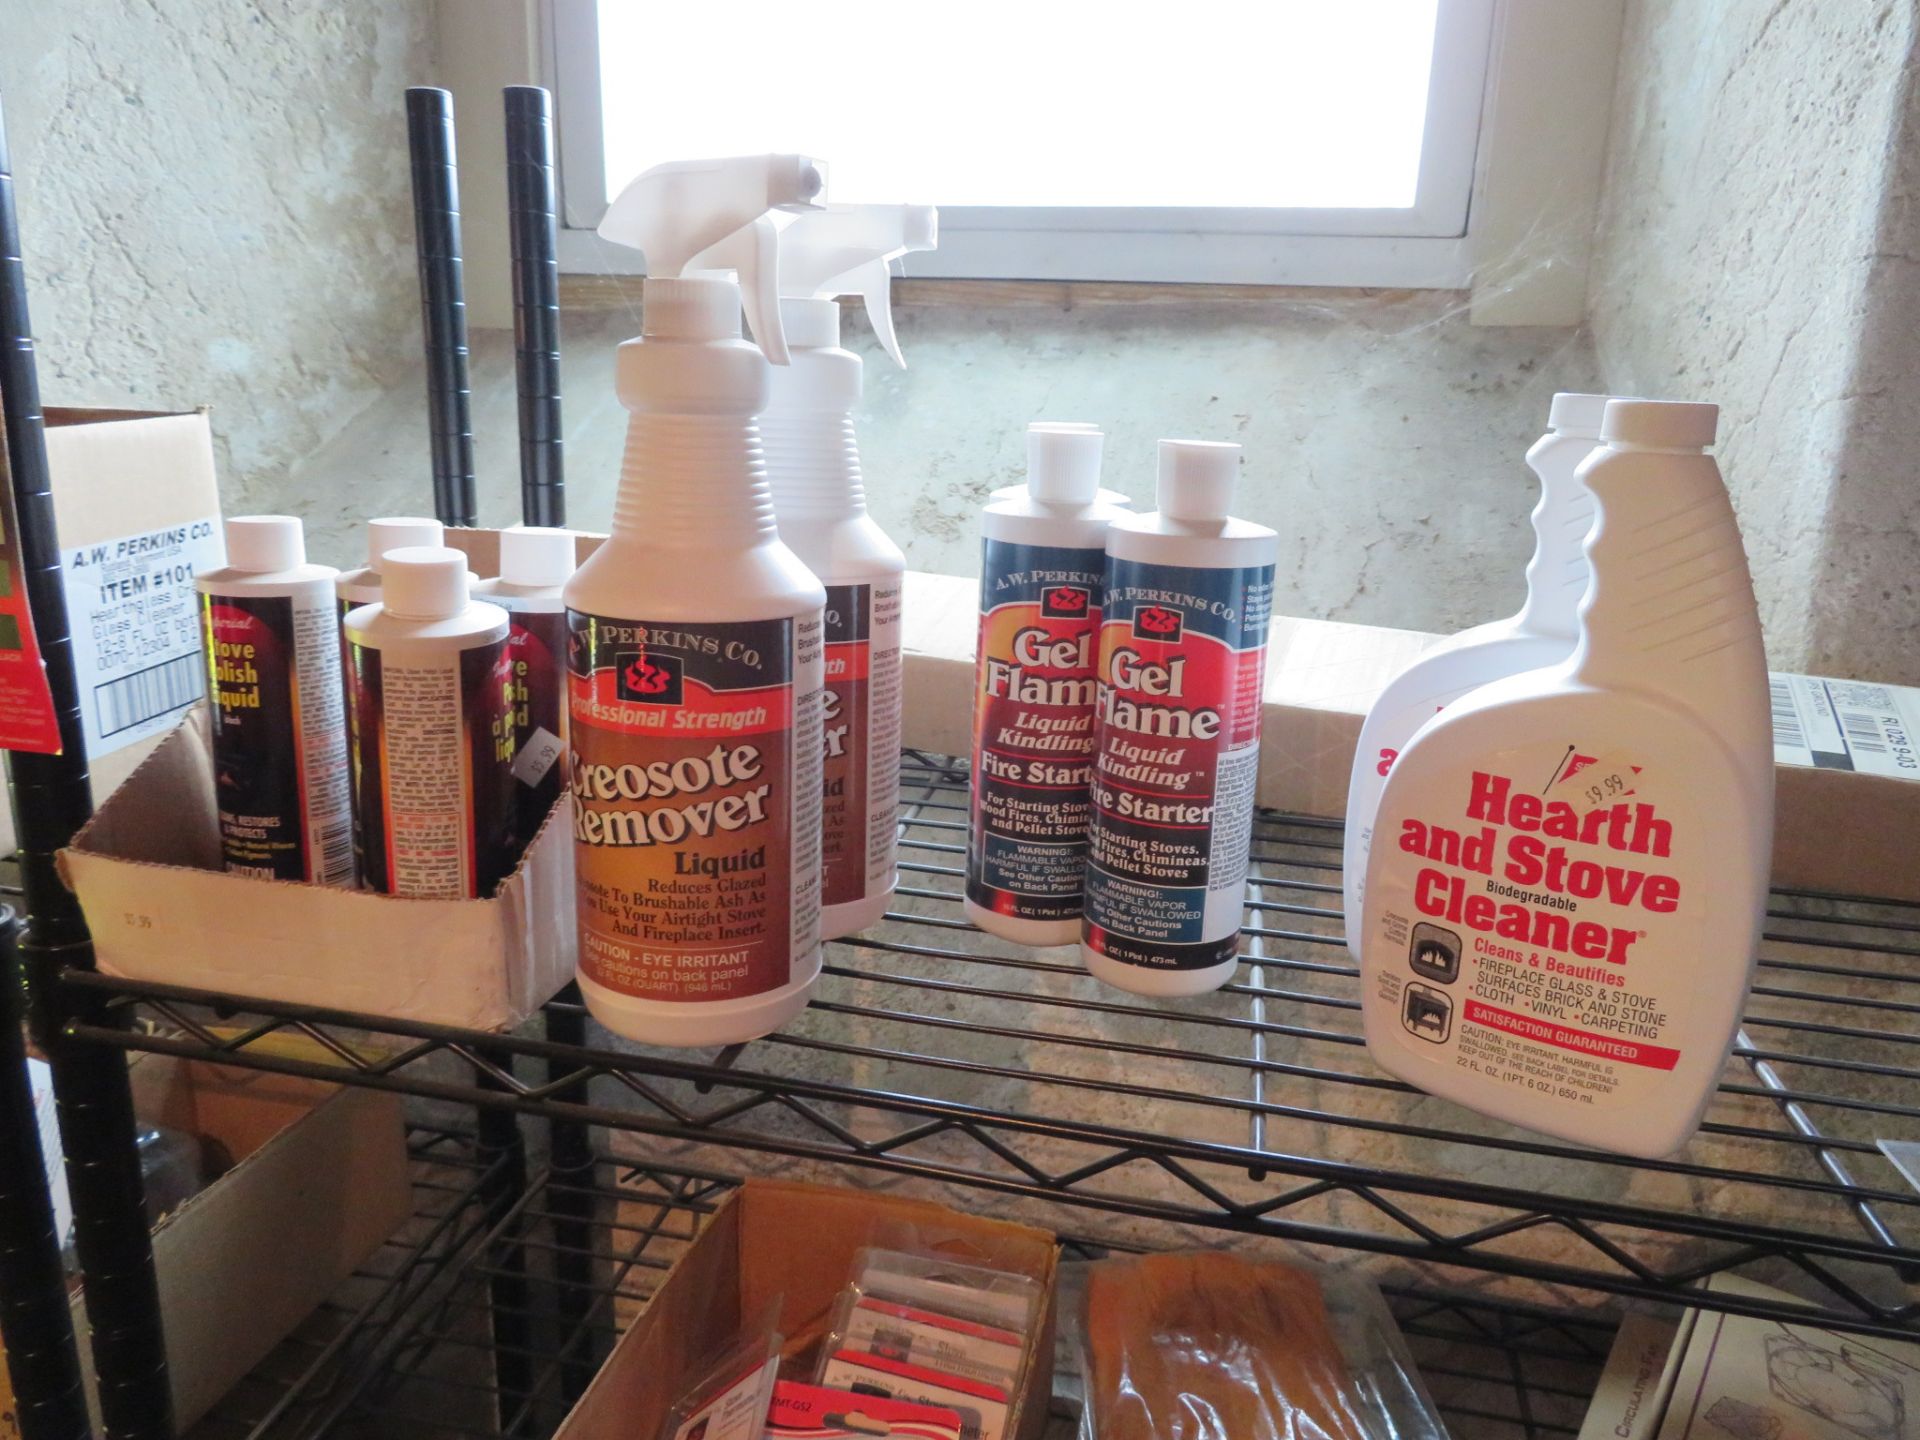 [LOT] Supplies on 1 Section of Metro Shelving C/O Stove Polish Liquid, Grill Components, Gel Flame